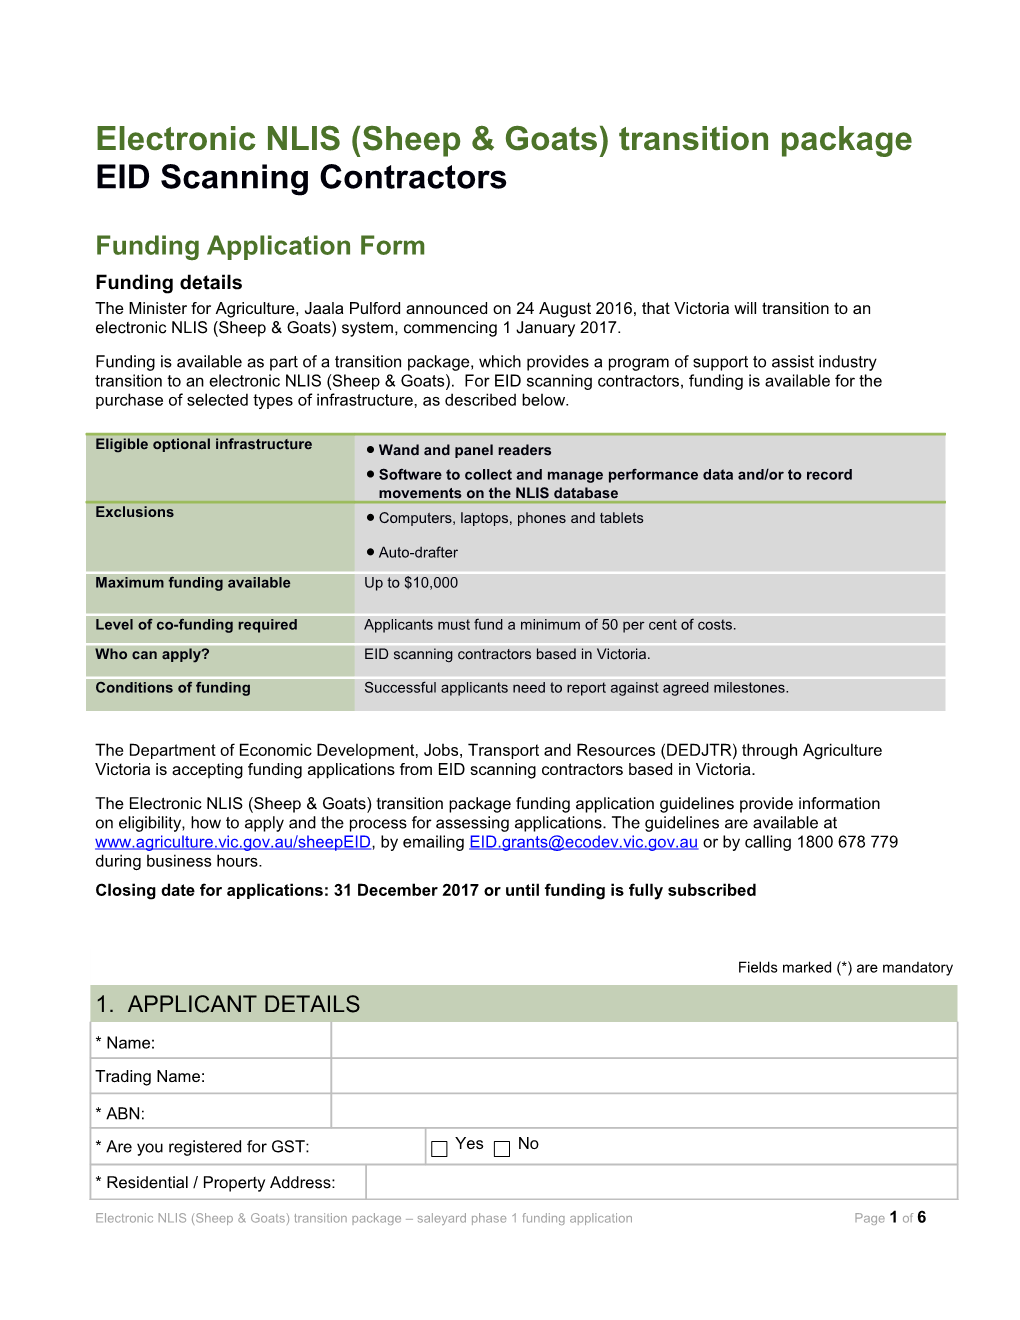 Electronicnlis (Sheep & Goats) Transition Package EID Scanning Contractors